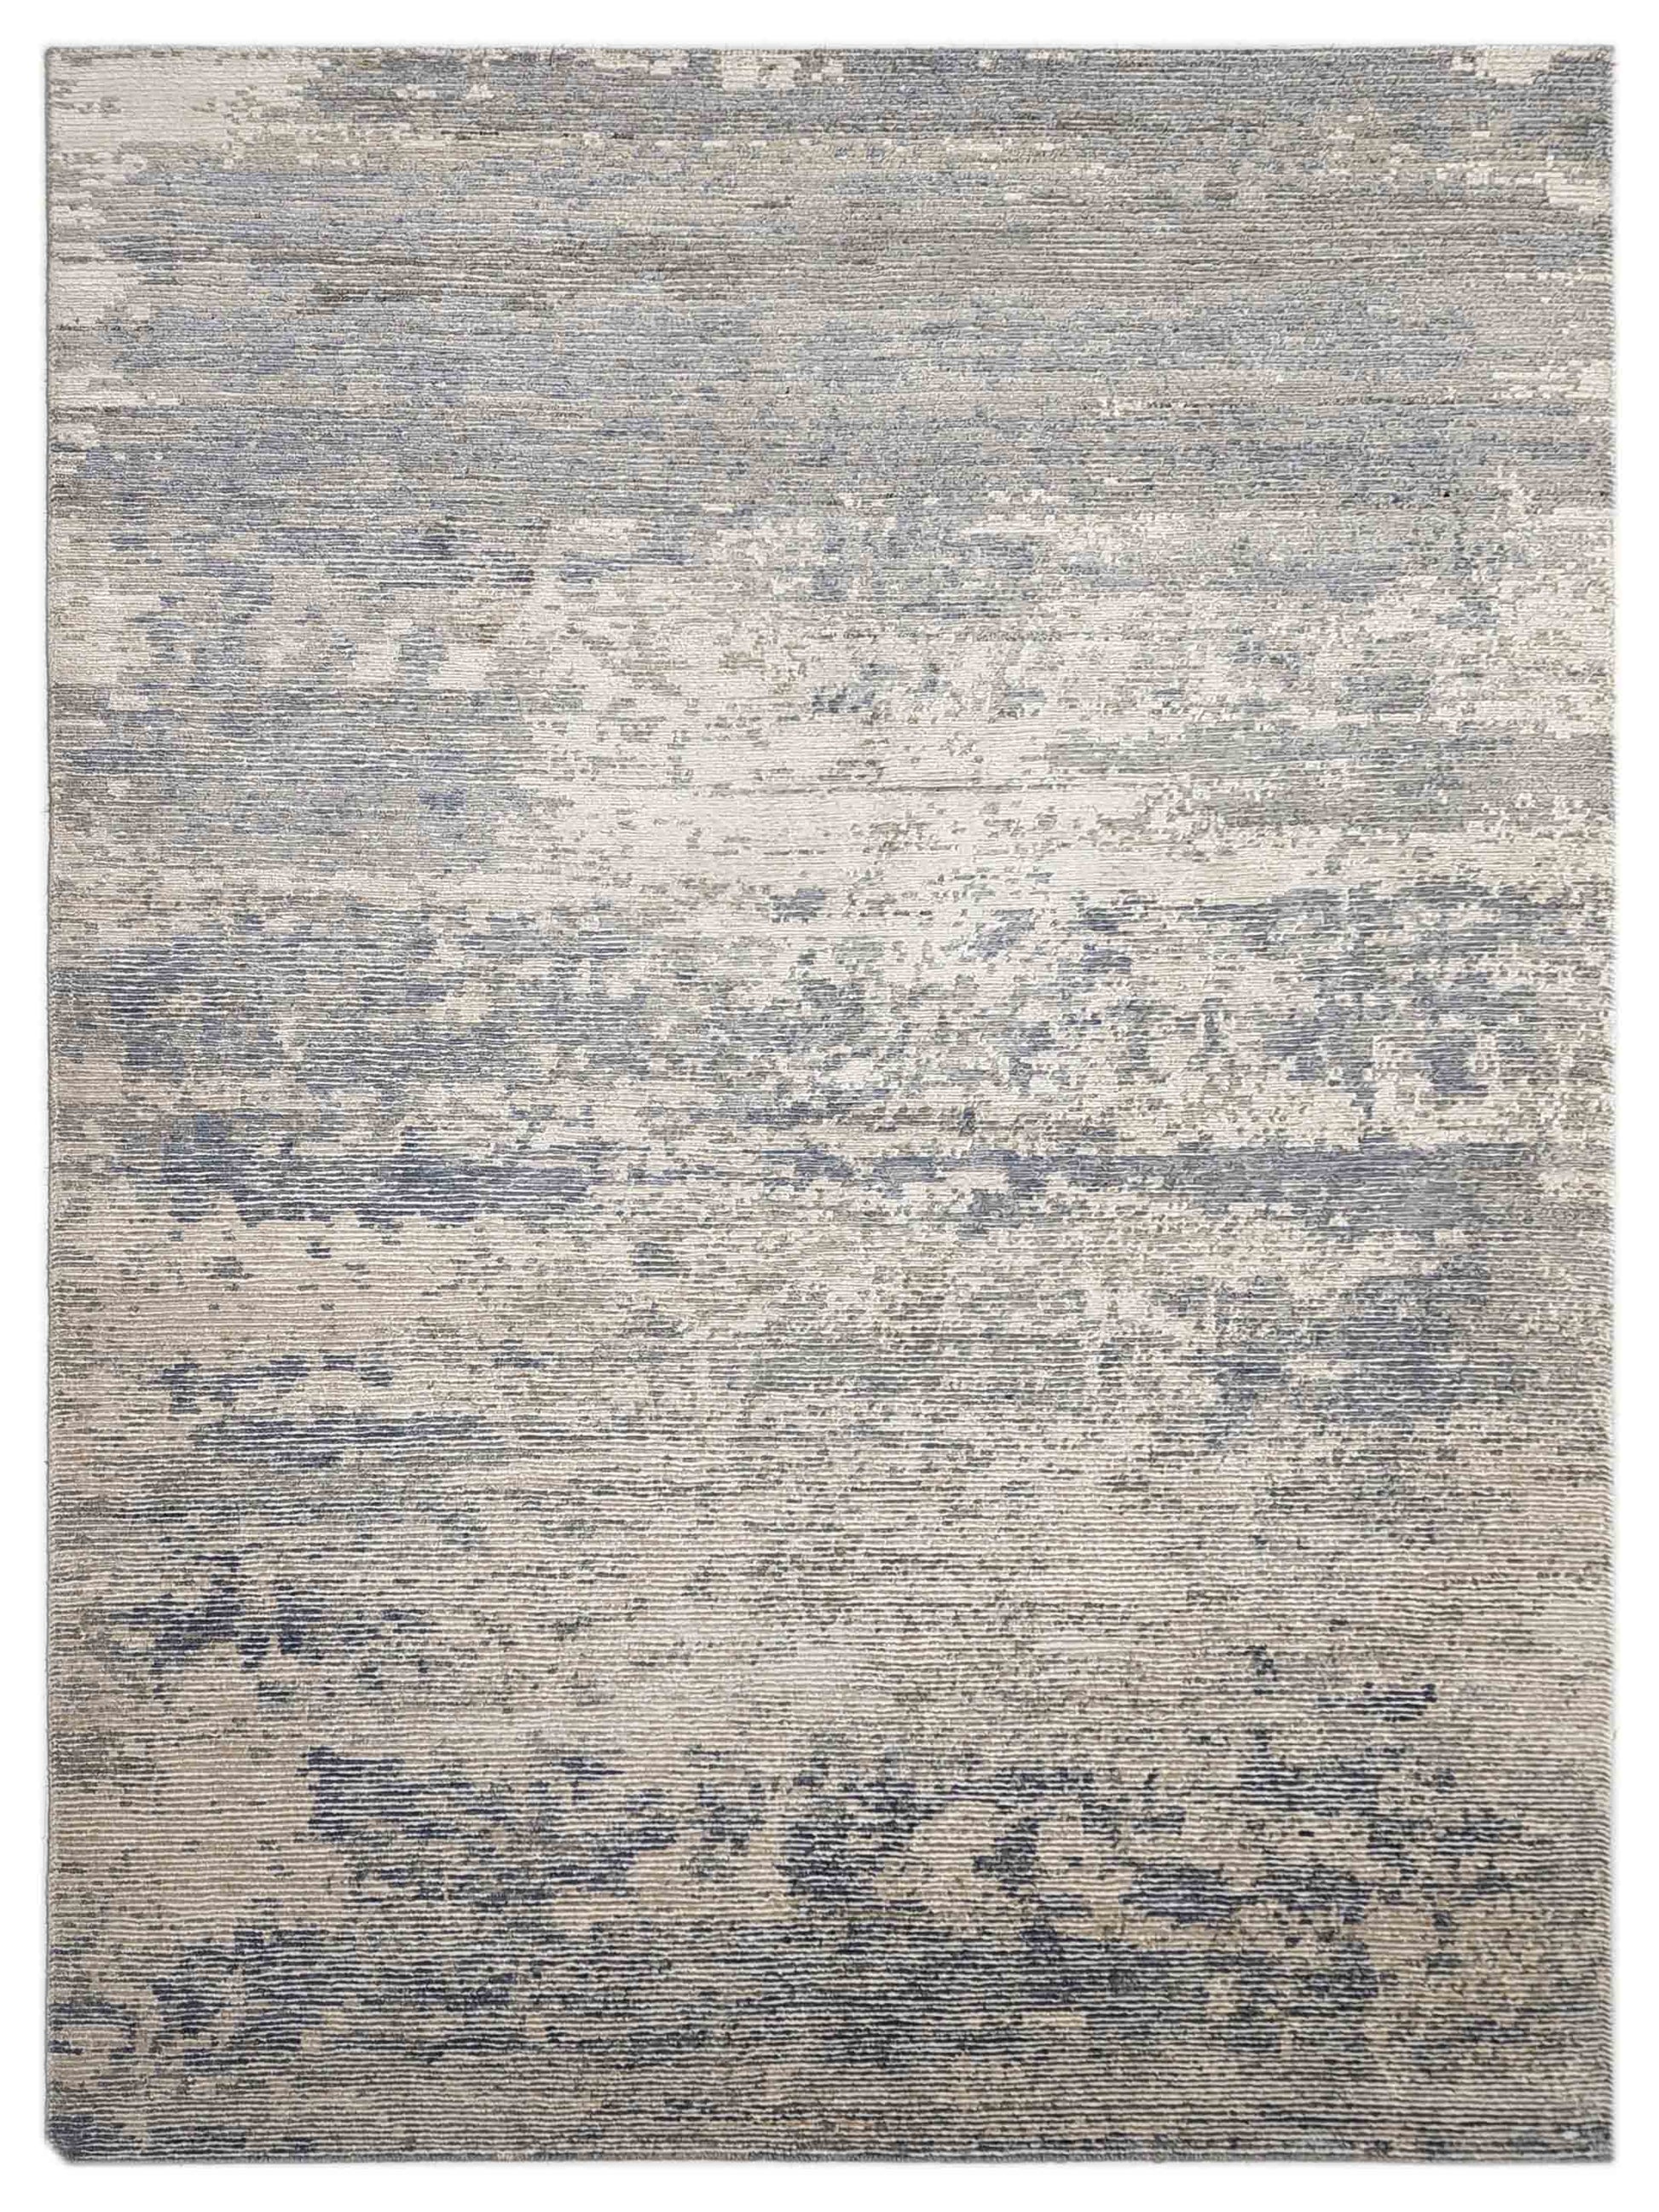 Artisan Mary MN-213 Silver Contemporary Knotted Rug